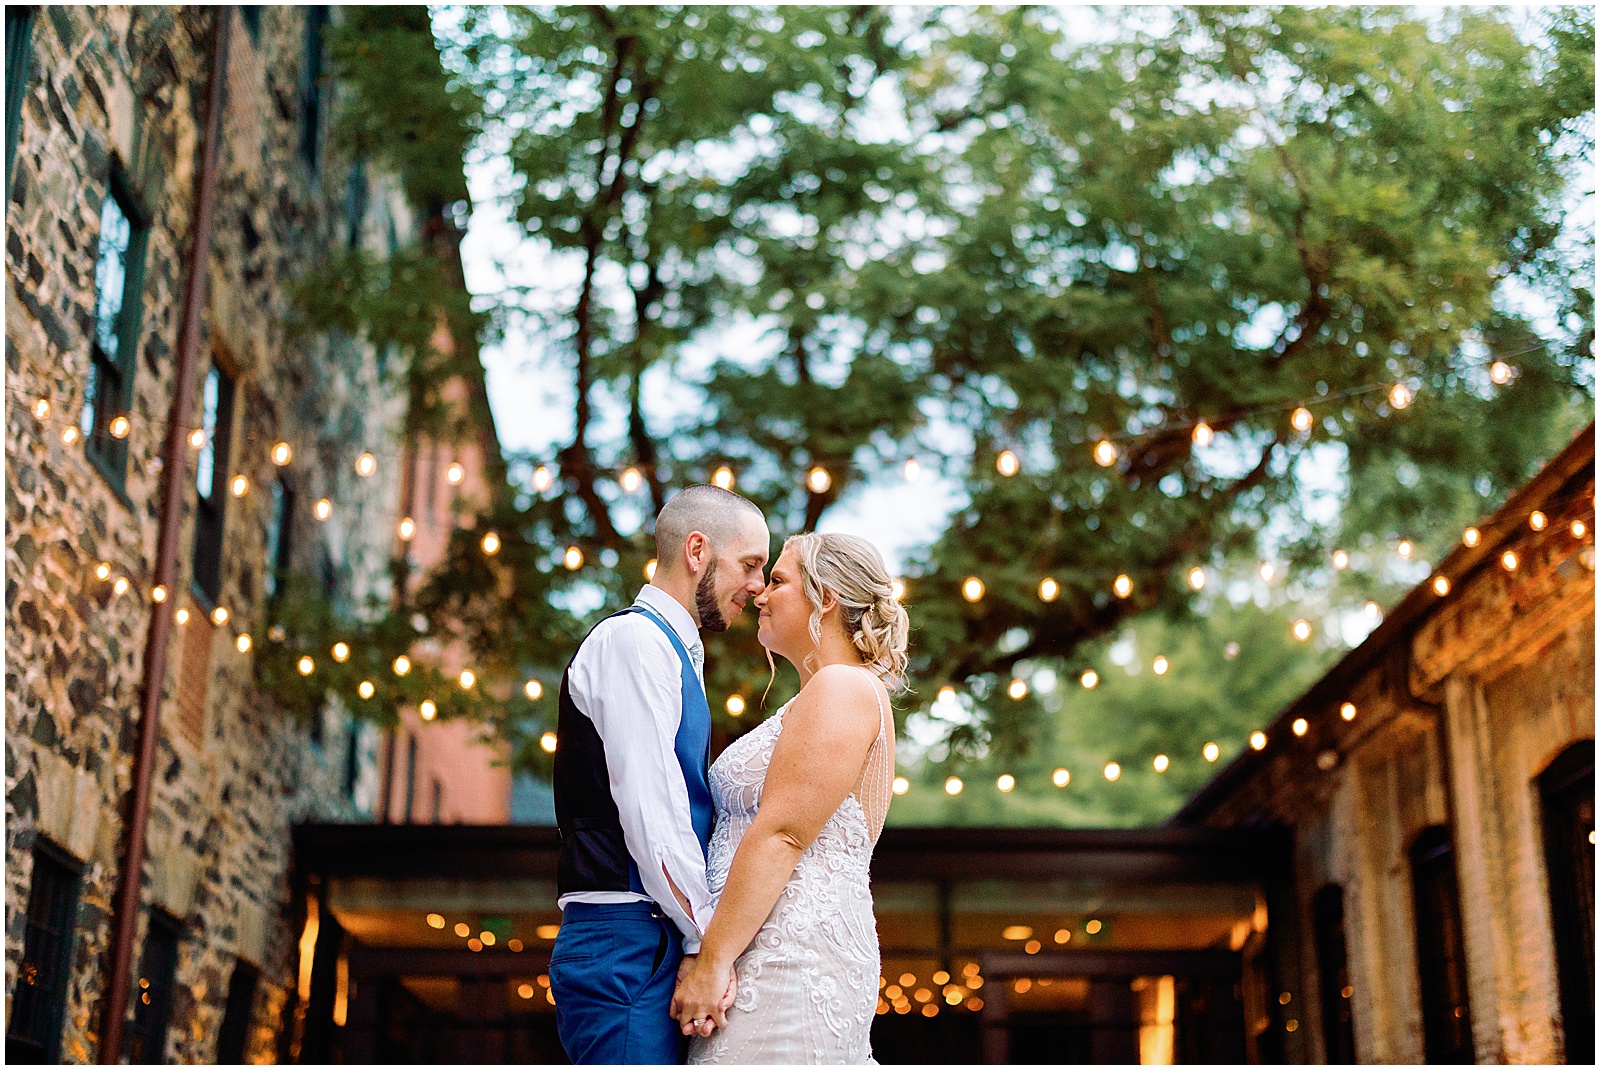 A bride and groom kiss in the courtyard of Mt Washington Mill Dye House.